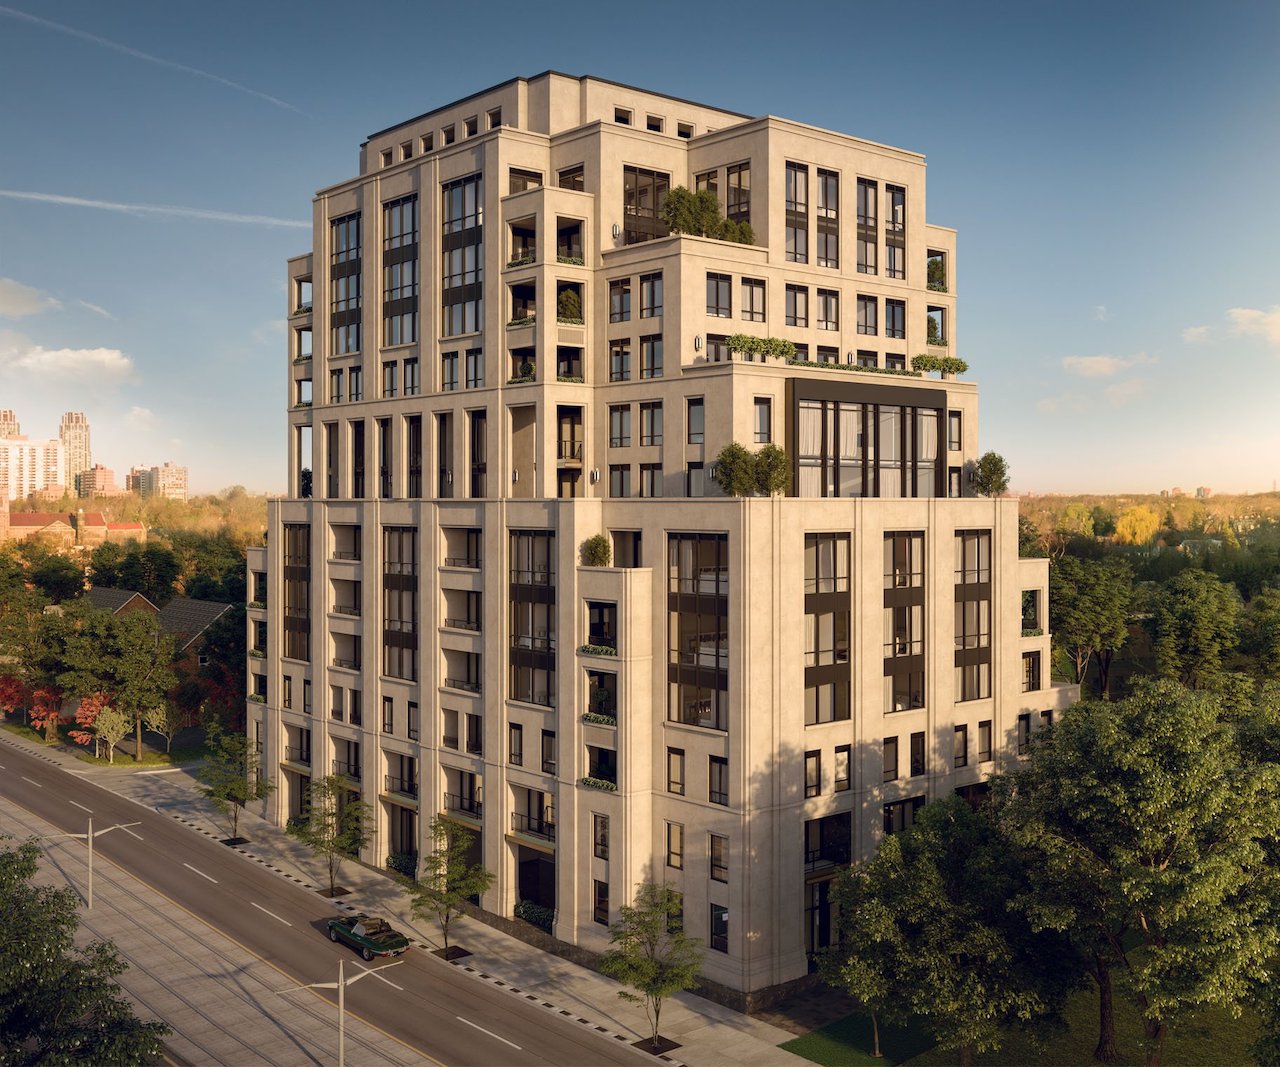 Exterior rendering of One Forest Hill Condos at dusk.